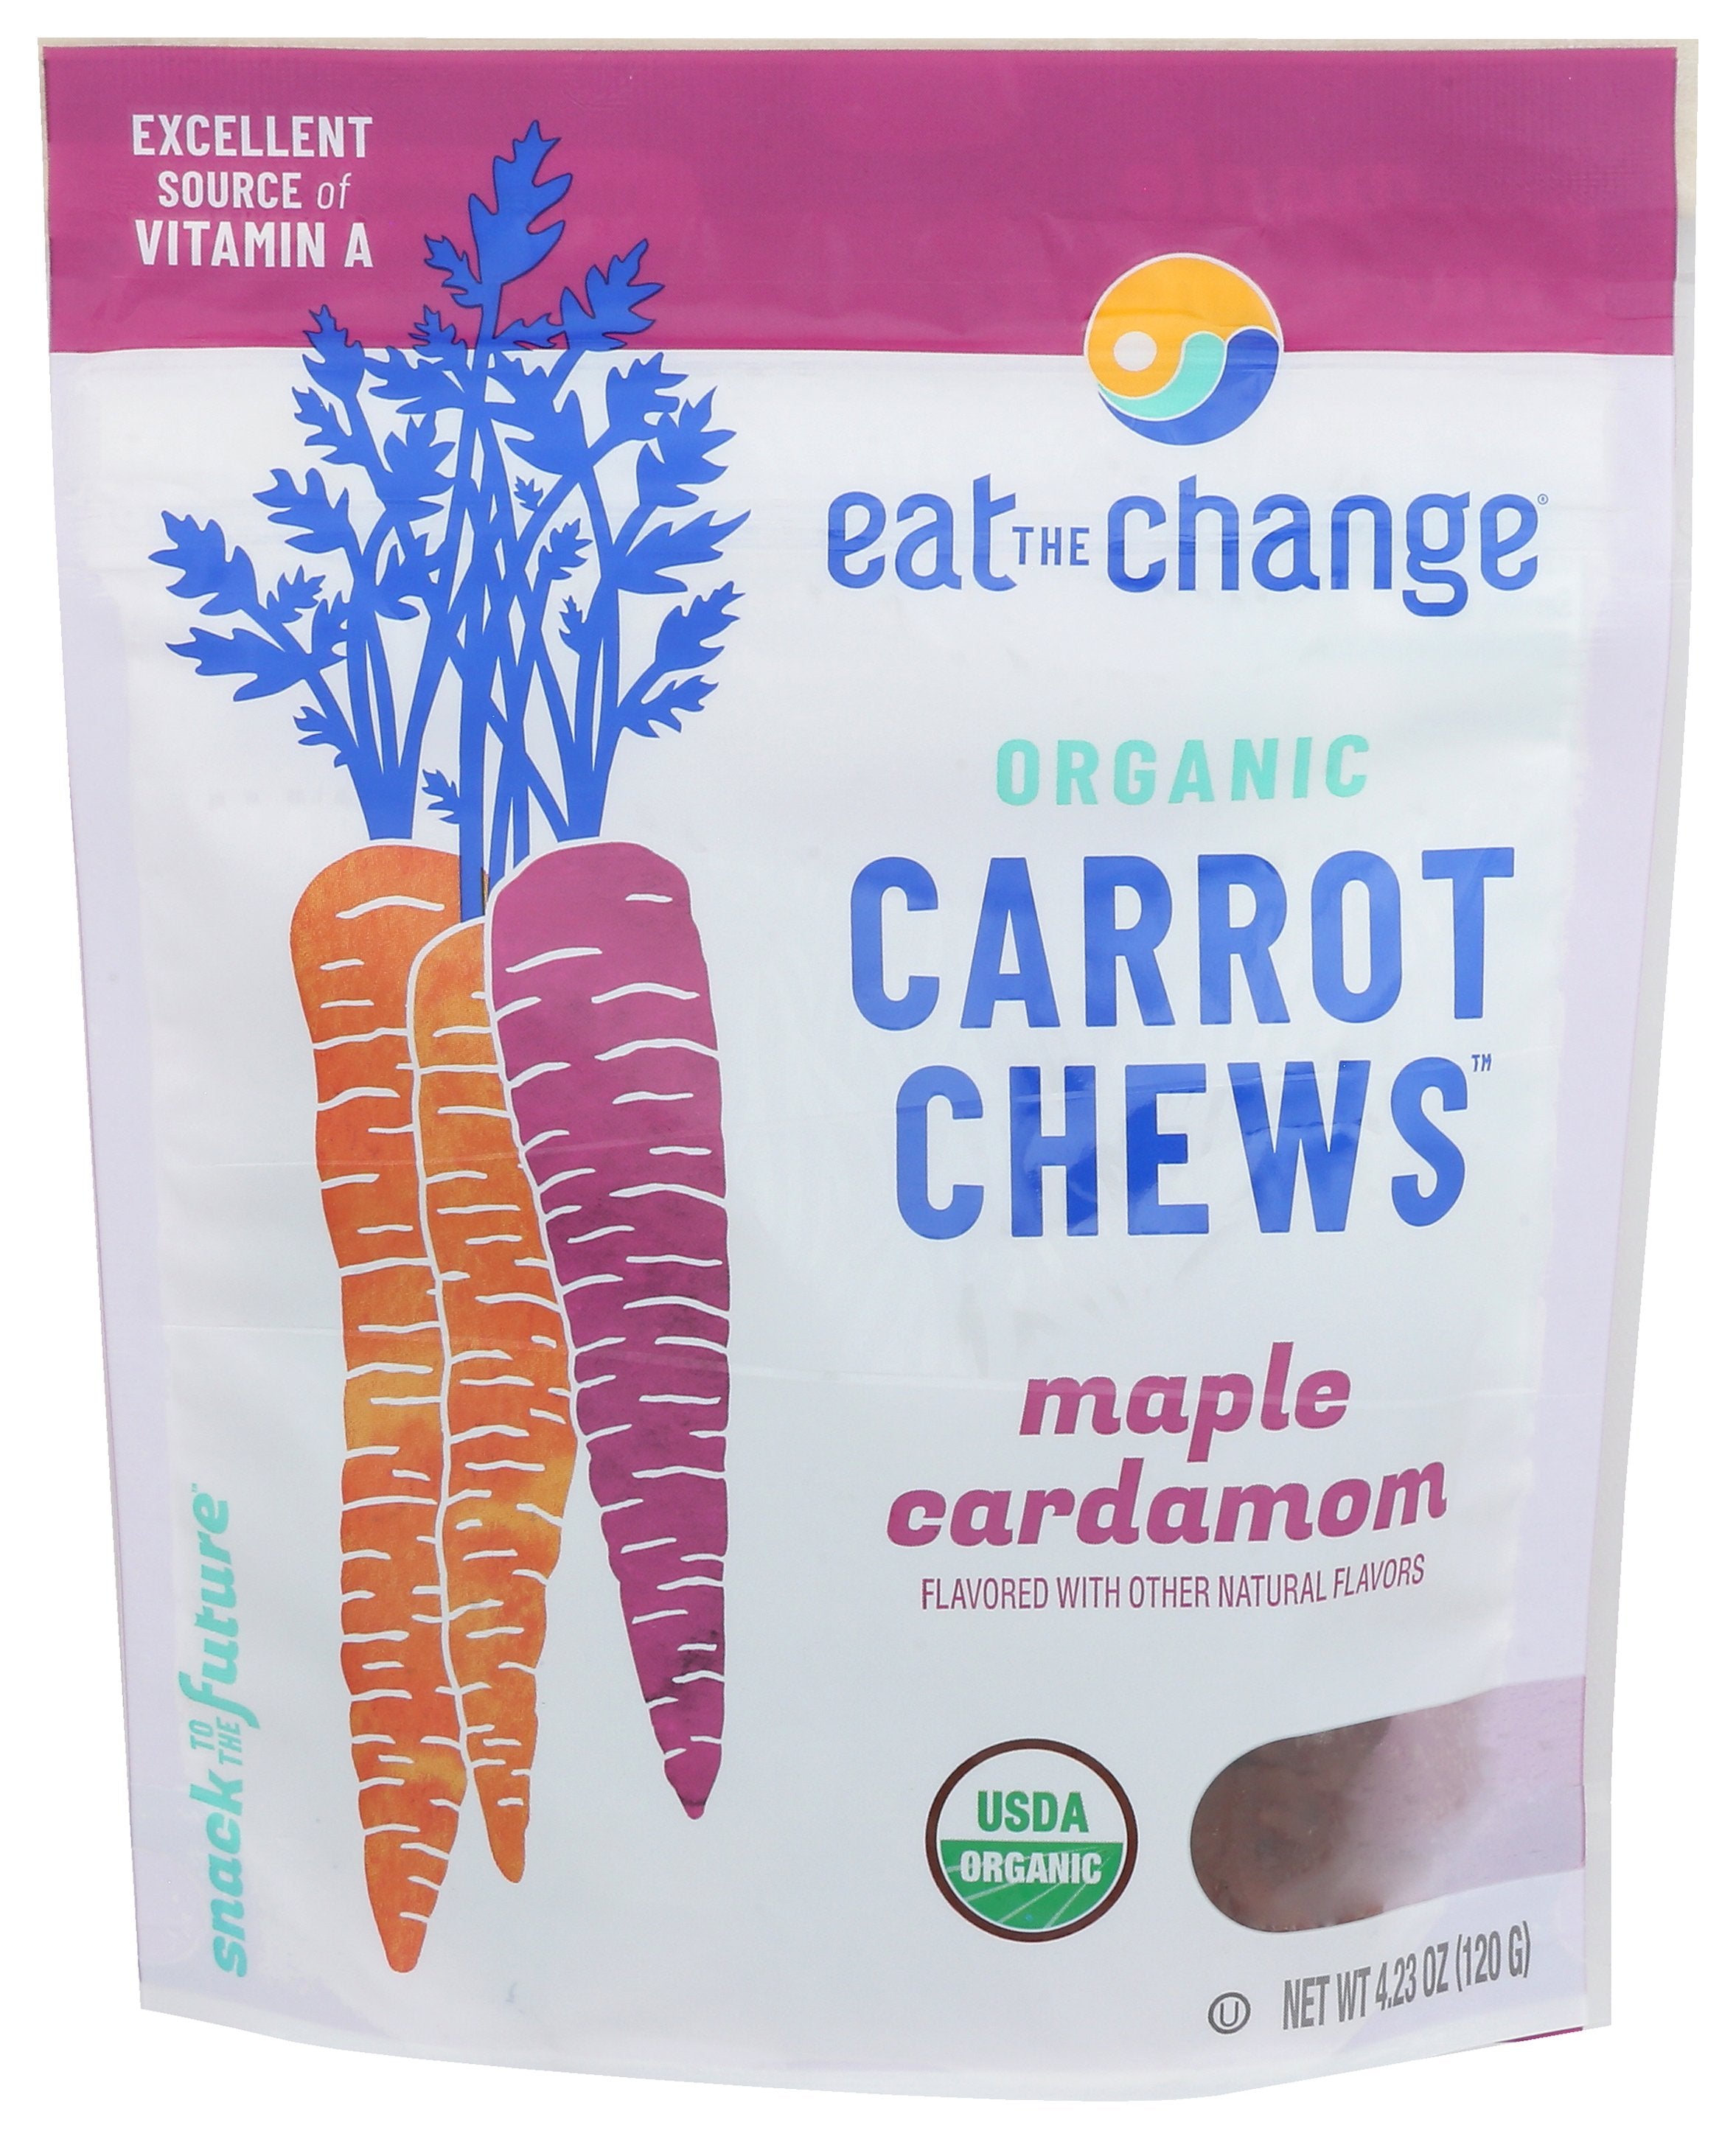 EAT THE CHANGE CARROT CHWS MPL CARDAMOM - Case of 8